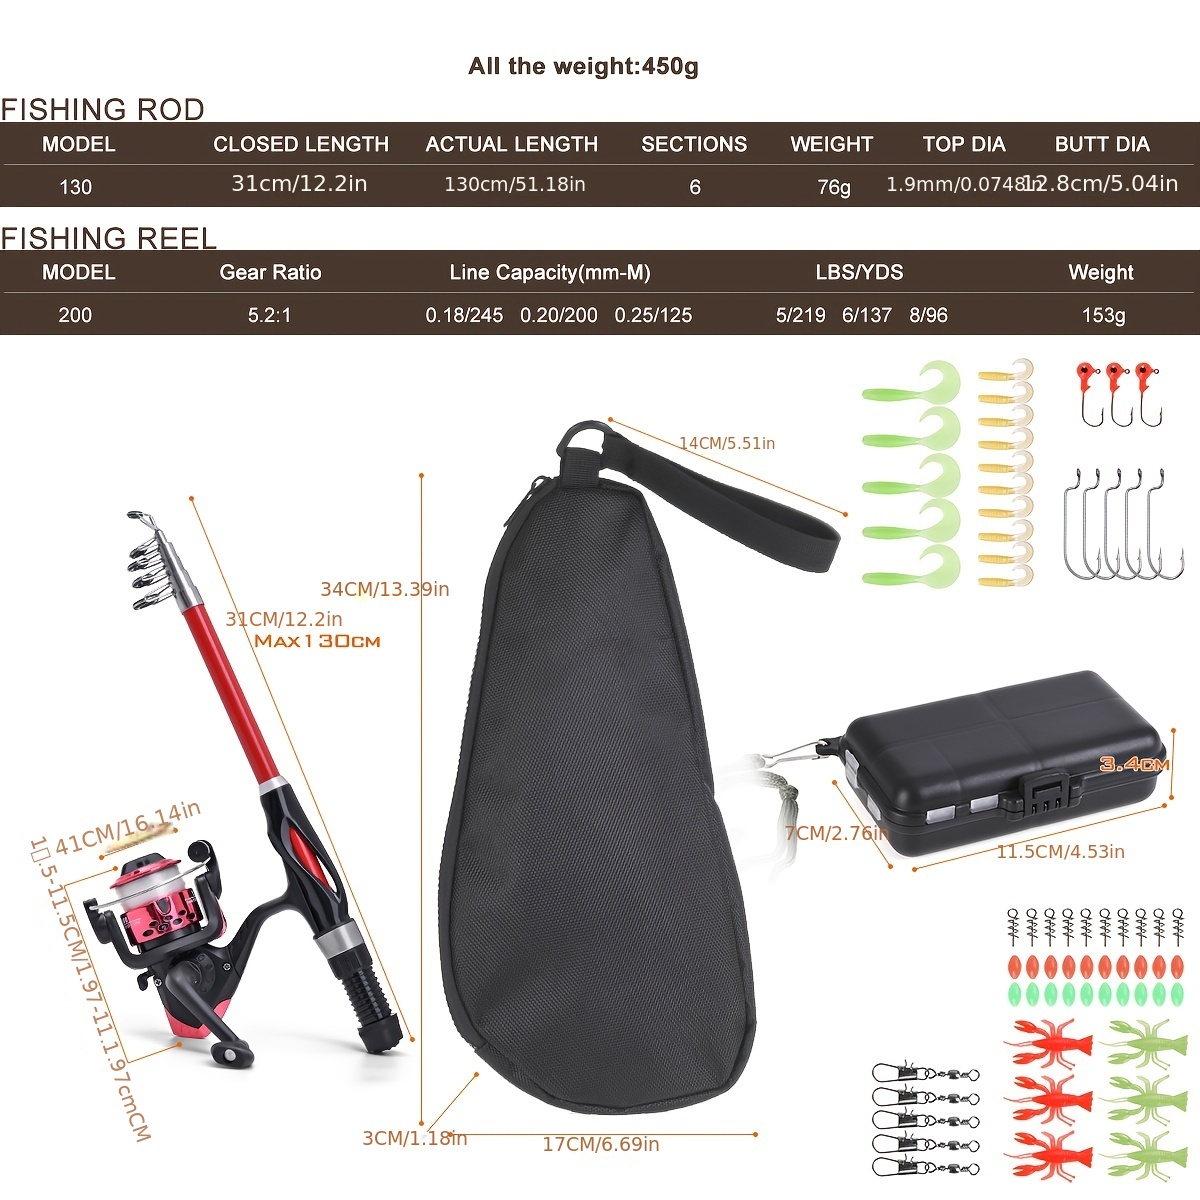 Portable Telescopic Fishing Rod Set With Fishing Case Fishing Reel For Kids  Best Gifts For Fishing Beginners